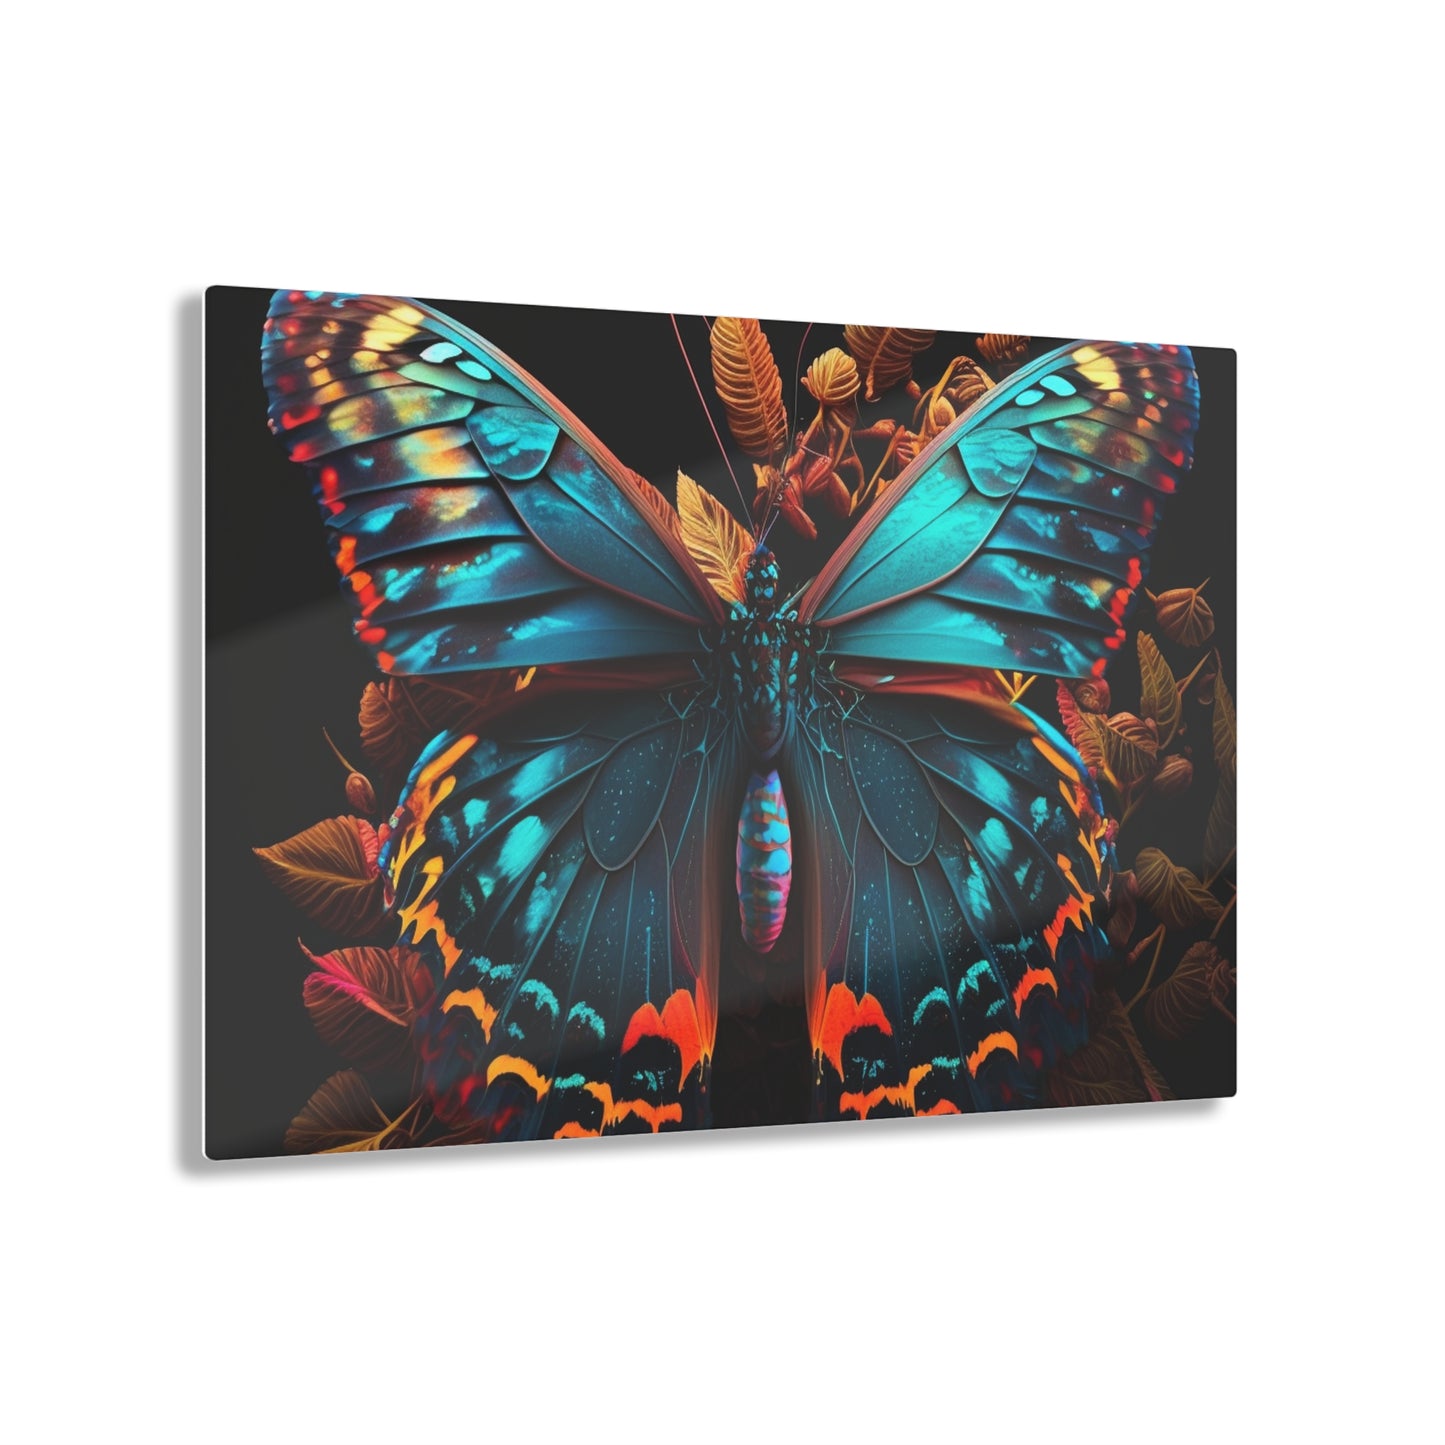 Acrylic Prints Hue Neon Butterfly 1